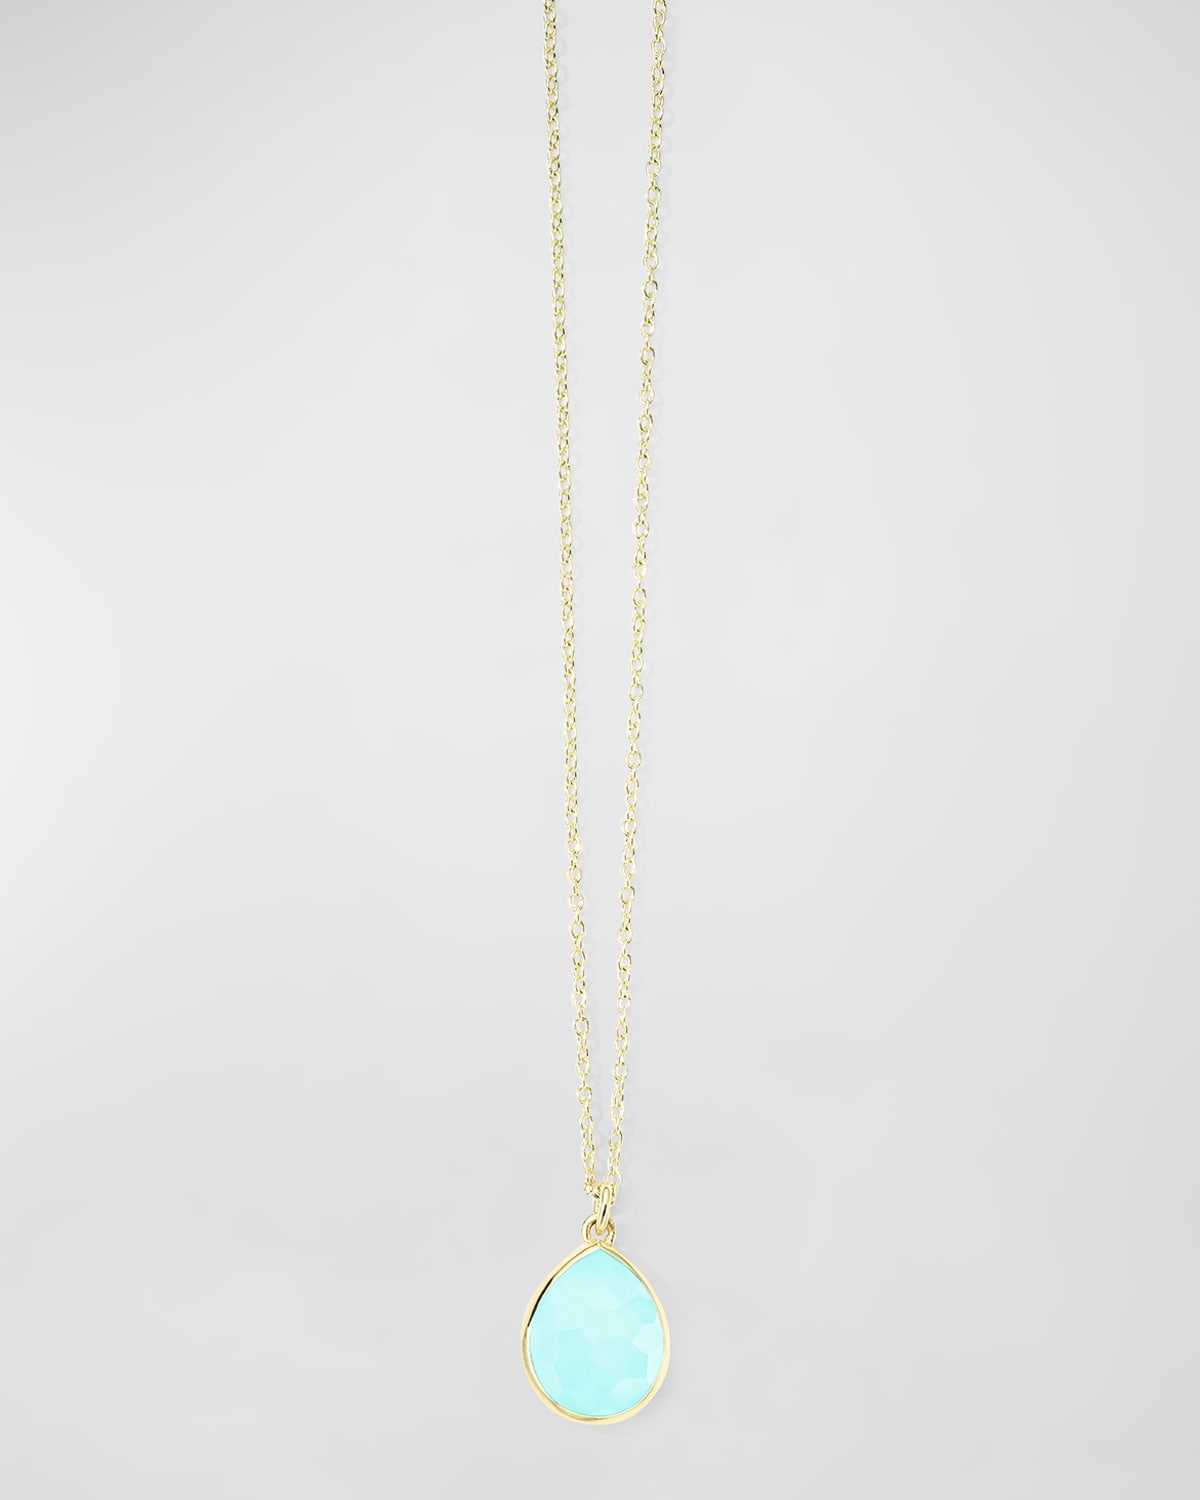 18K Gold Rock Candy Mini Teardrop Pendant Necklace in Turquoise Doublet, 16-18"L